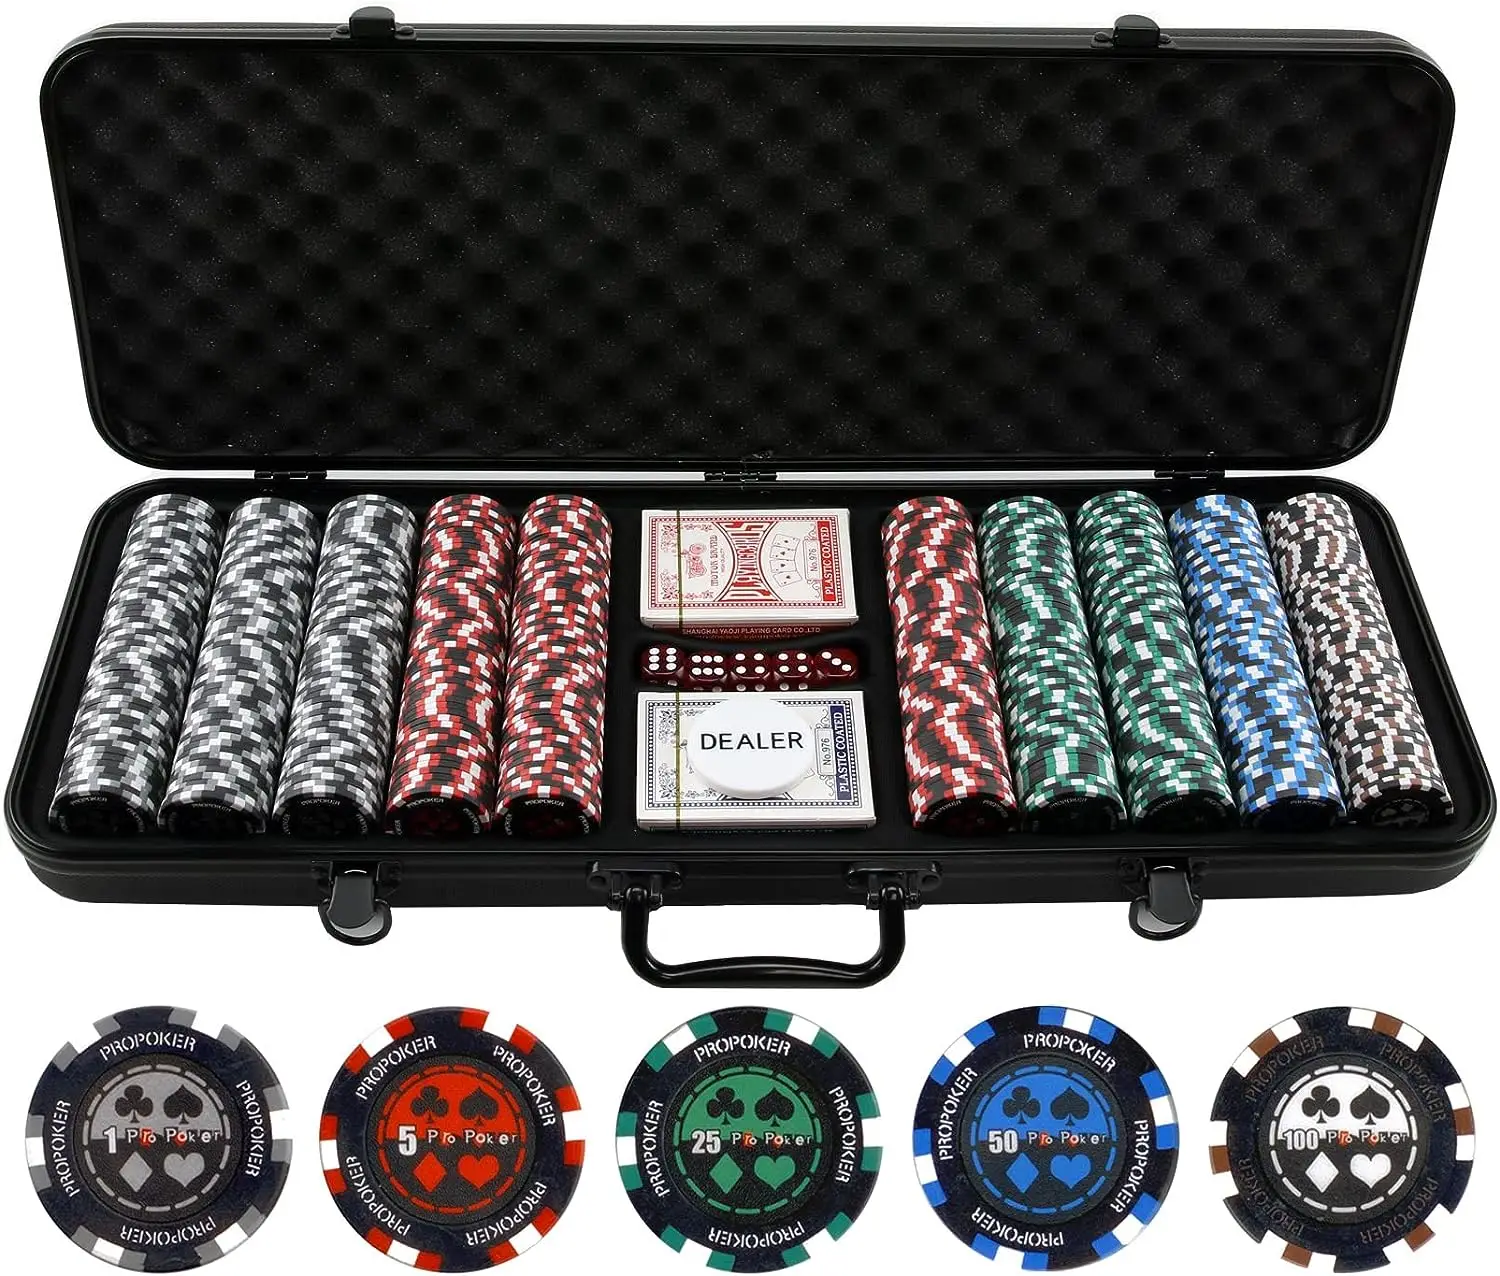 

Games 500 13.5g Pro Poker Clay Poker Chip Set - Casino Quality Clay Poker Chips with Denomination Numbers for Texas Holdem Mahjo